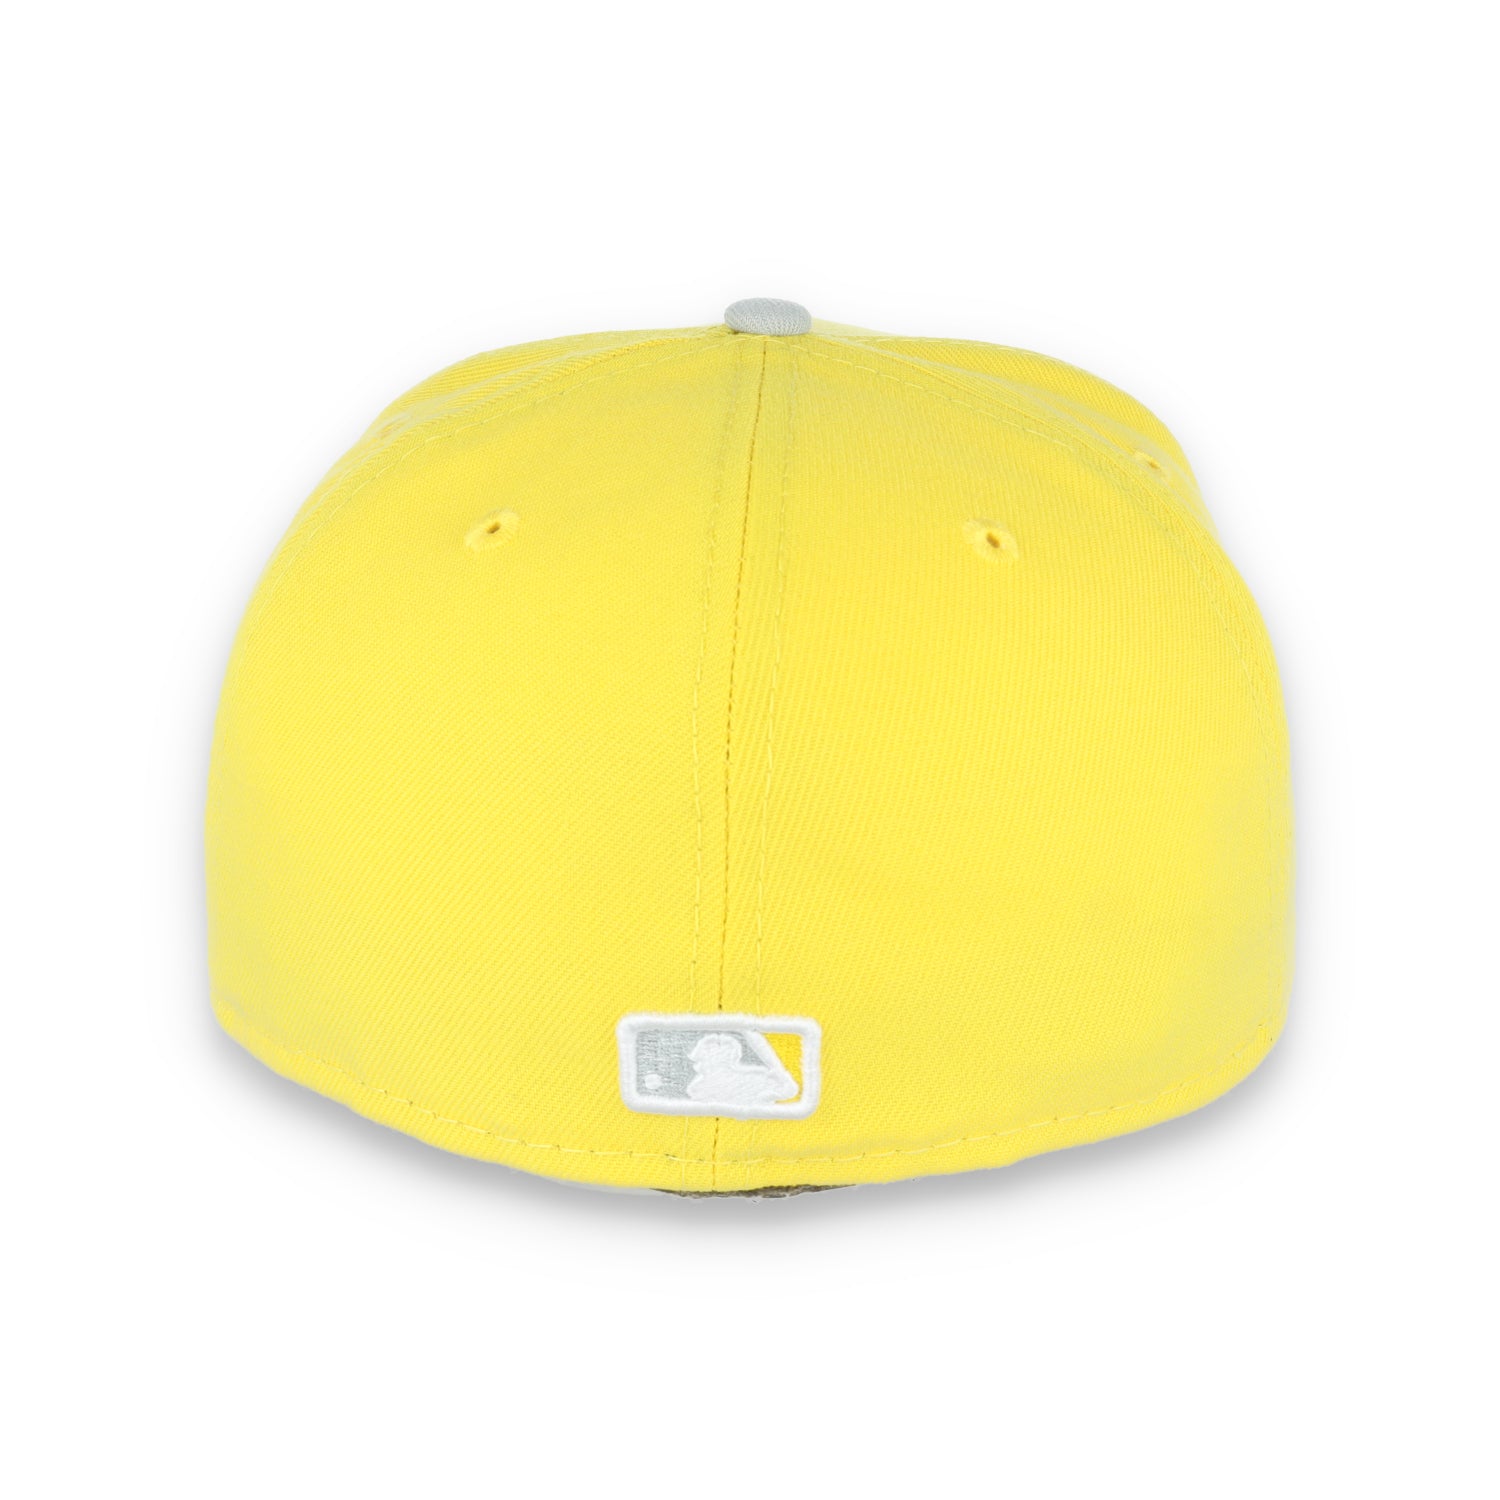 NEW ERA OAKLAND ATHLETICS 59FIFTY COLOR PACK-YELLOW/GREY